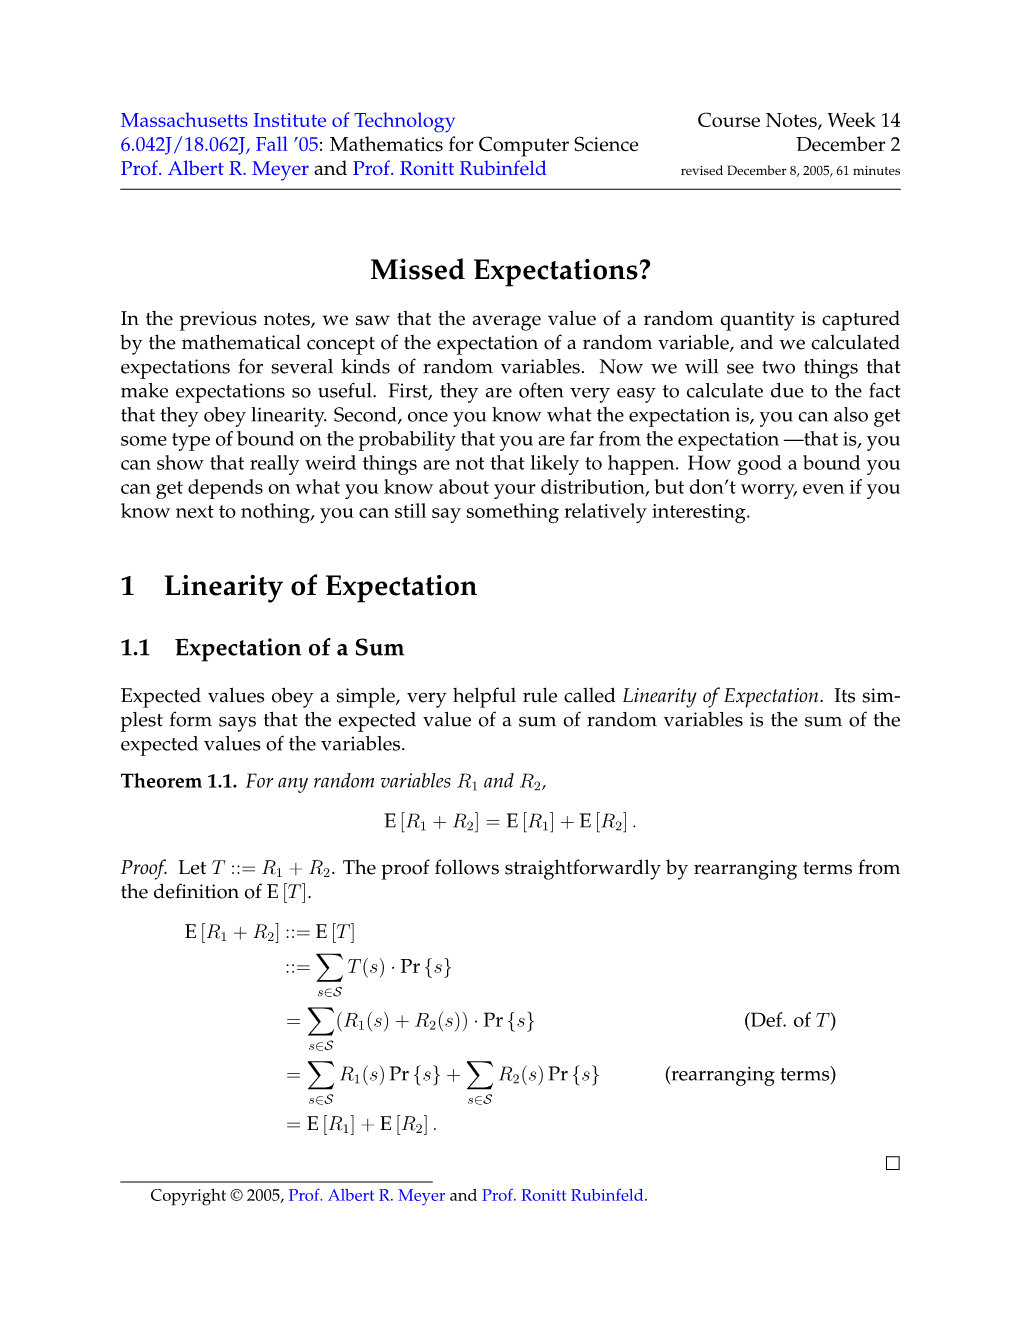 Missed Expectations? 1 Linearity of Expectation